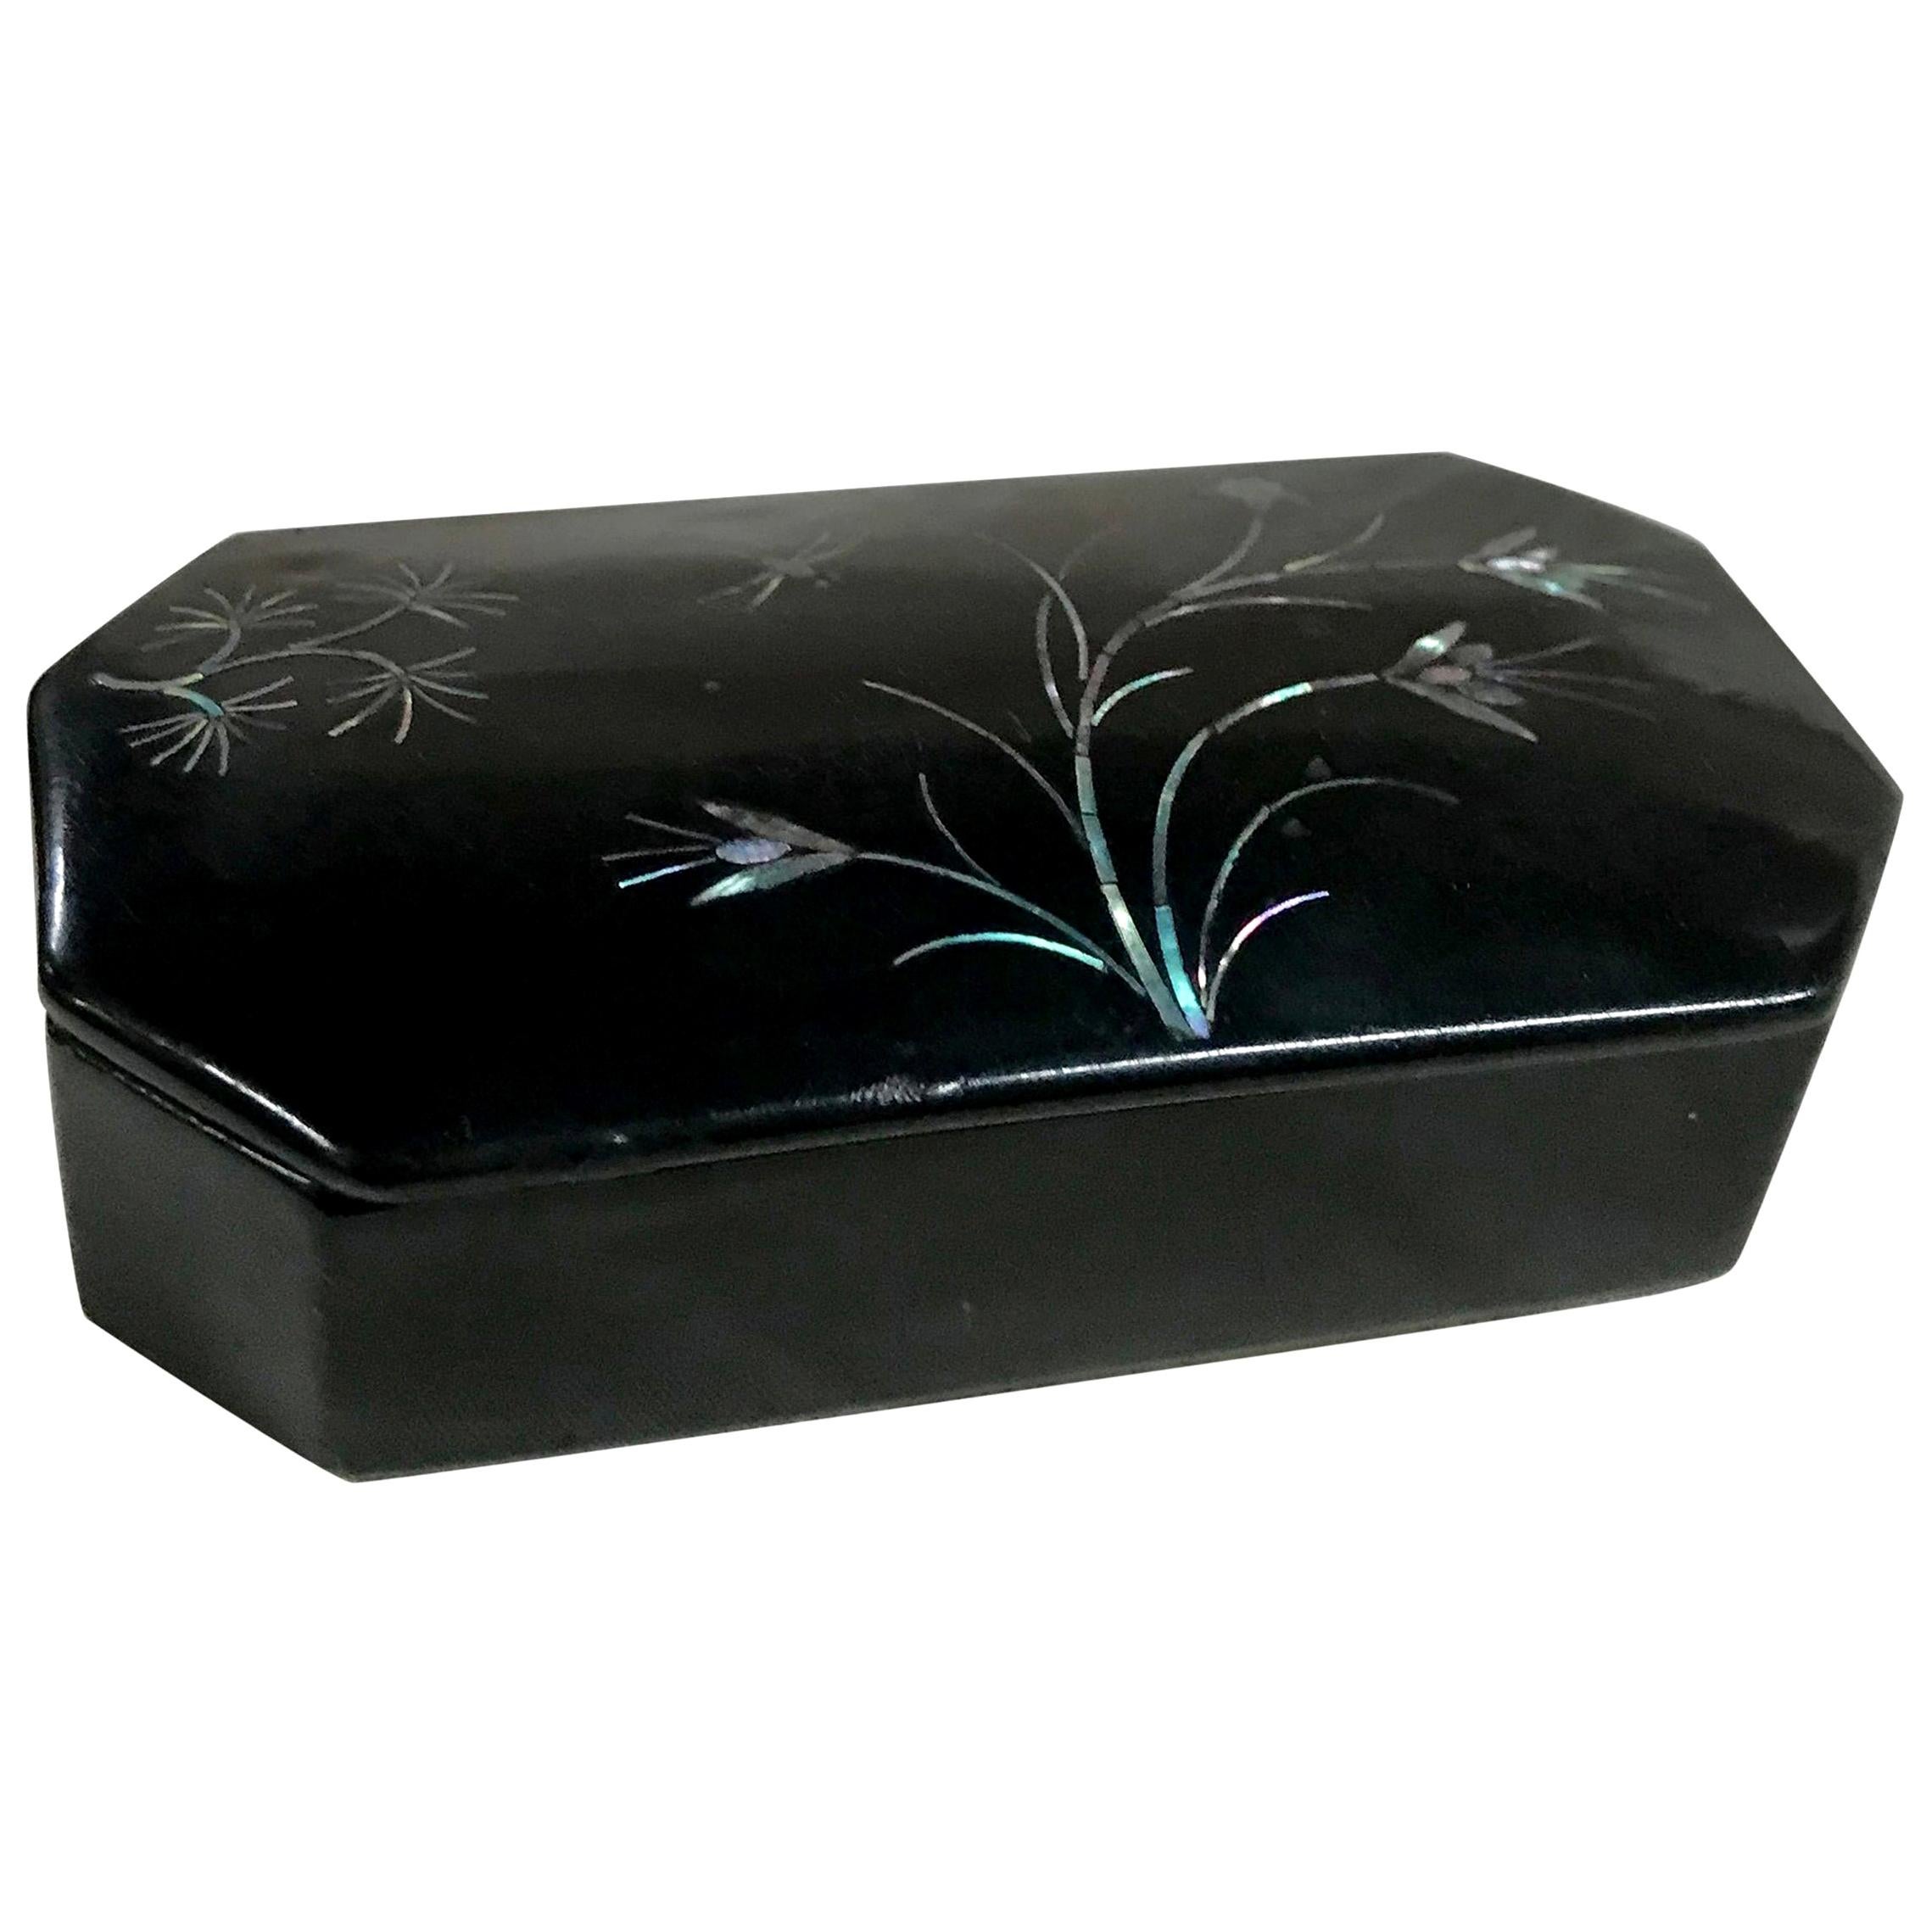 Mother of Pearl Flowers and Dragonfly on Asian Black Lacquer Snuff Box